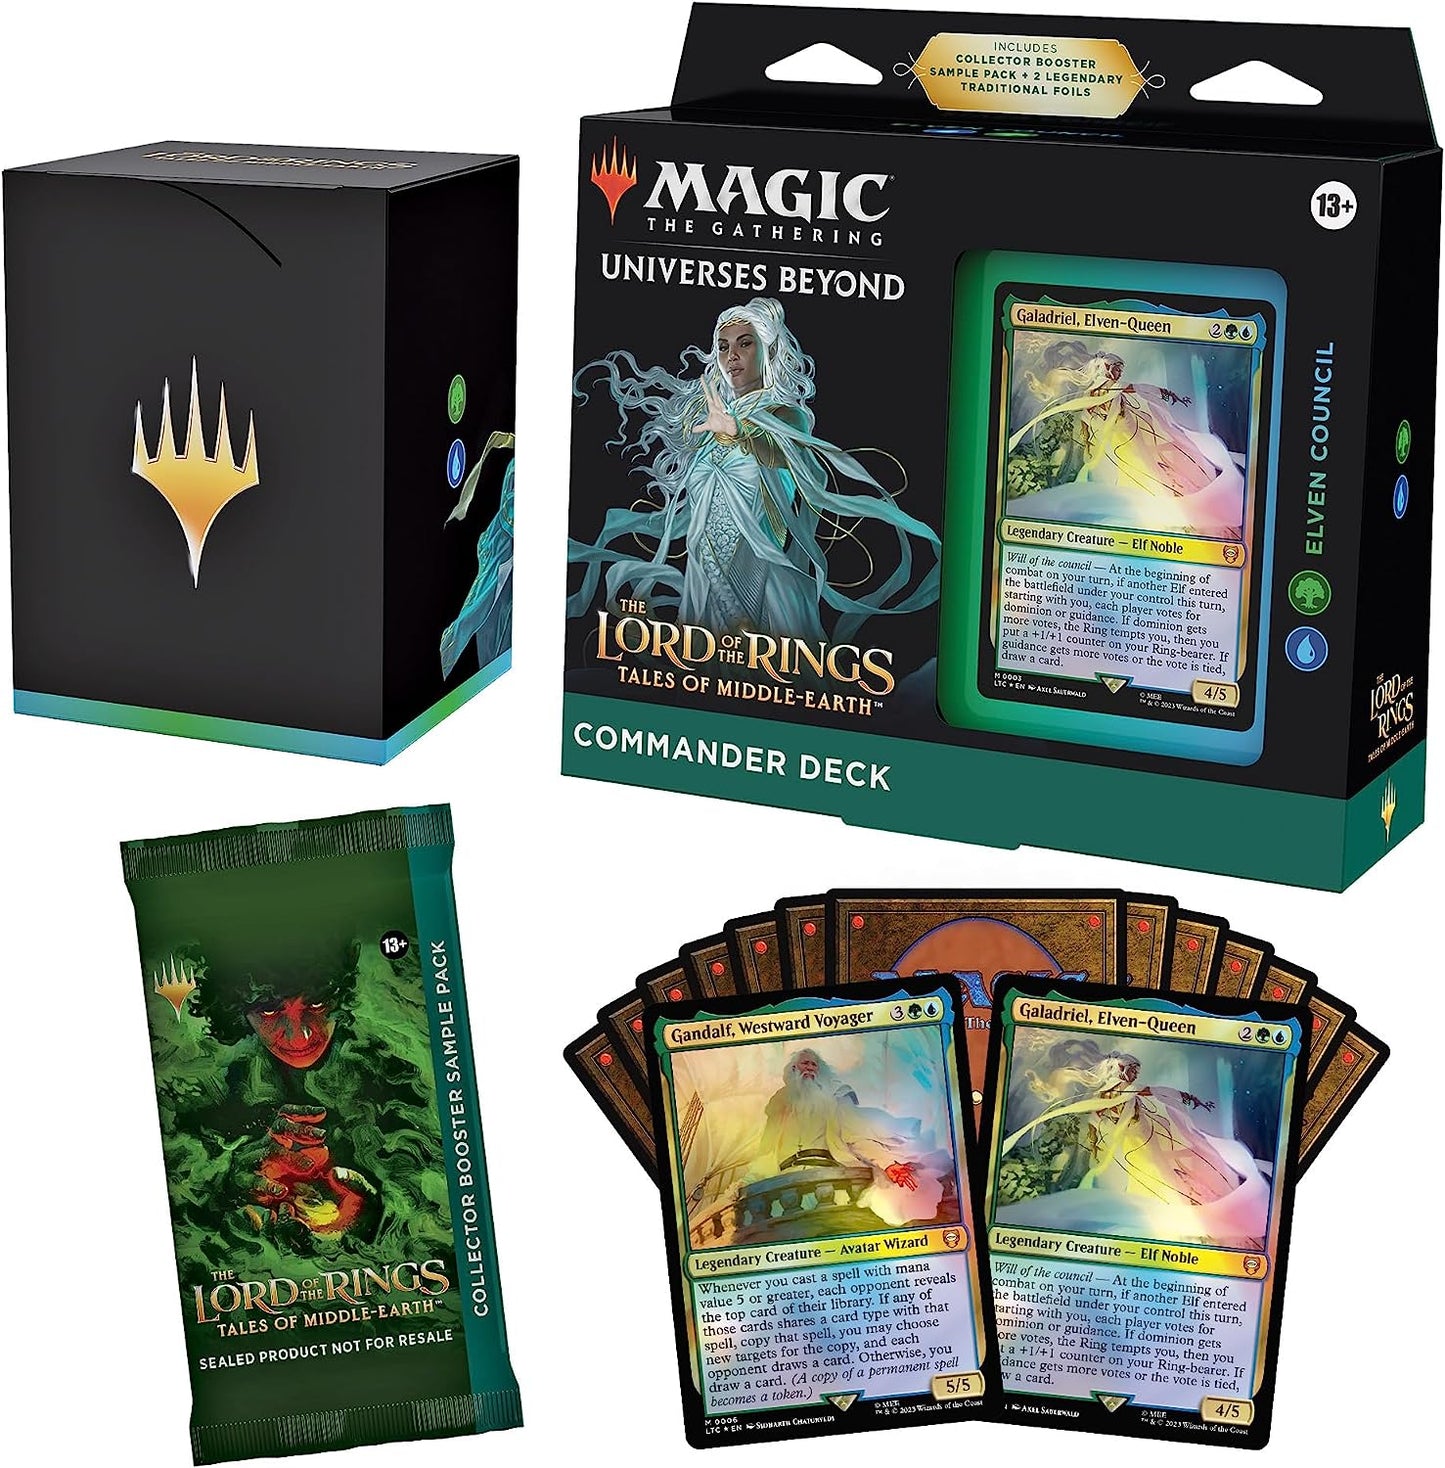 MAGIC THE GATHERING - LOTR TALES OF MIDDLE-EARTH - COMMANDER DECK - ENGLISH